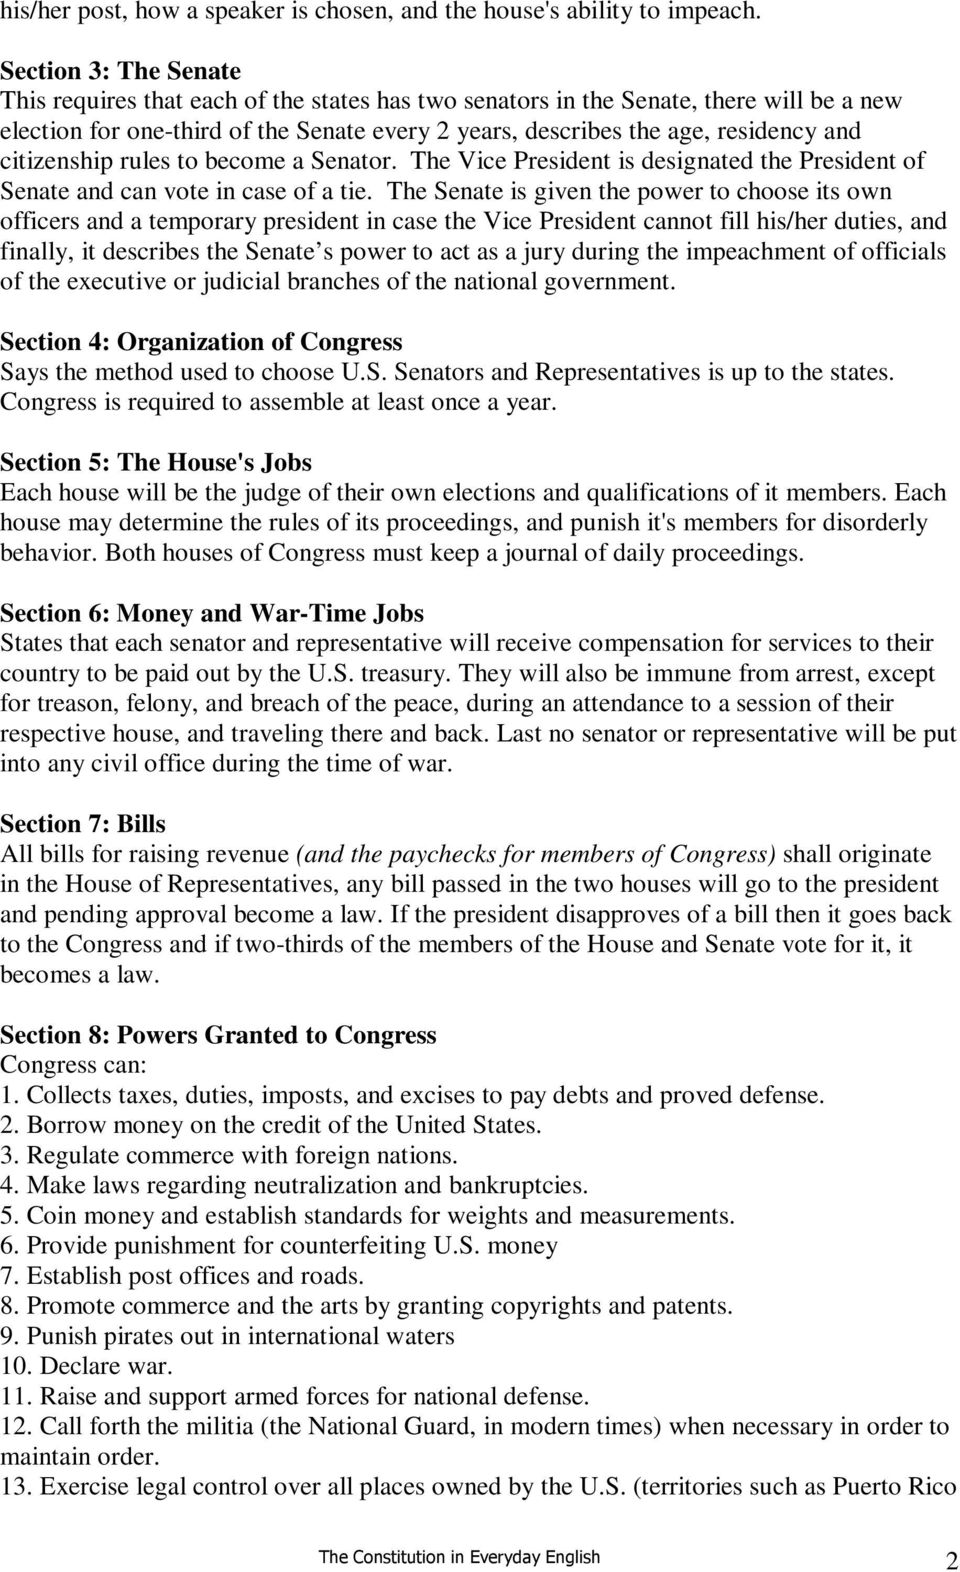 citizenship rules to become a Senator. The Vice President is designated the President of Senate and can vote in case of a tie.